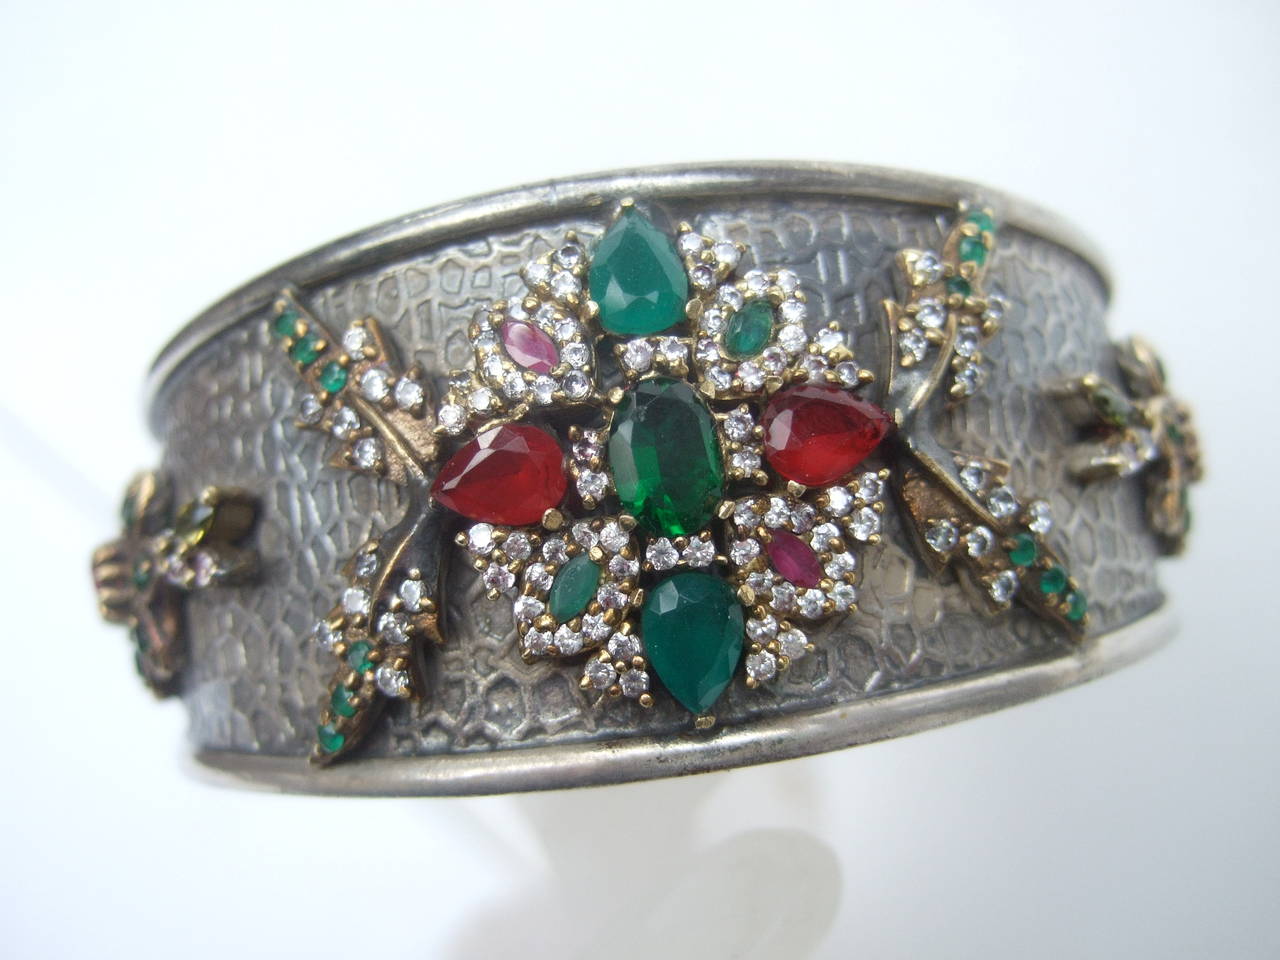 Opulent jewel encrusted sterling silver cuff bracelet. The elegant cuff is embellished with emerald green & ruby color crystals. The jewel tone crystals are embellished with glittering diamante settings

The sterling cuff is accented with a